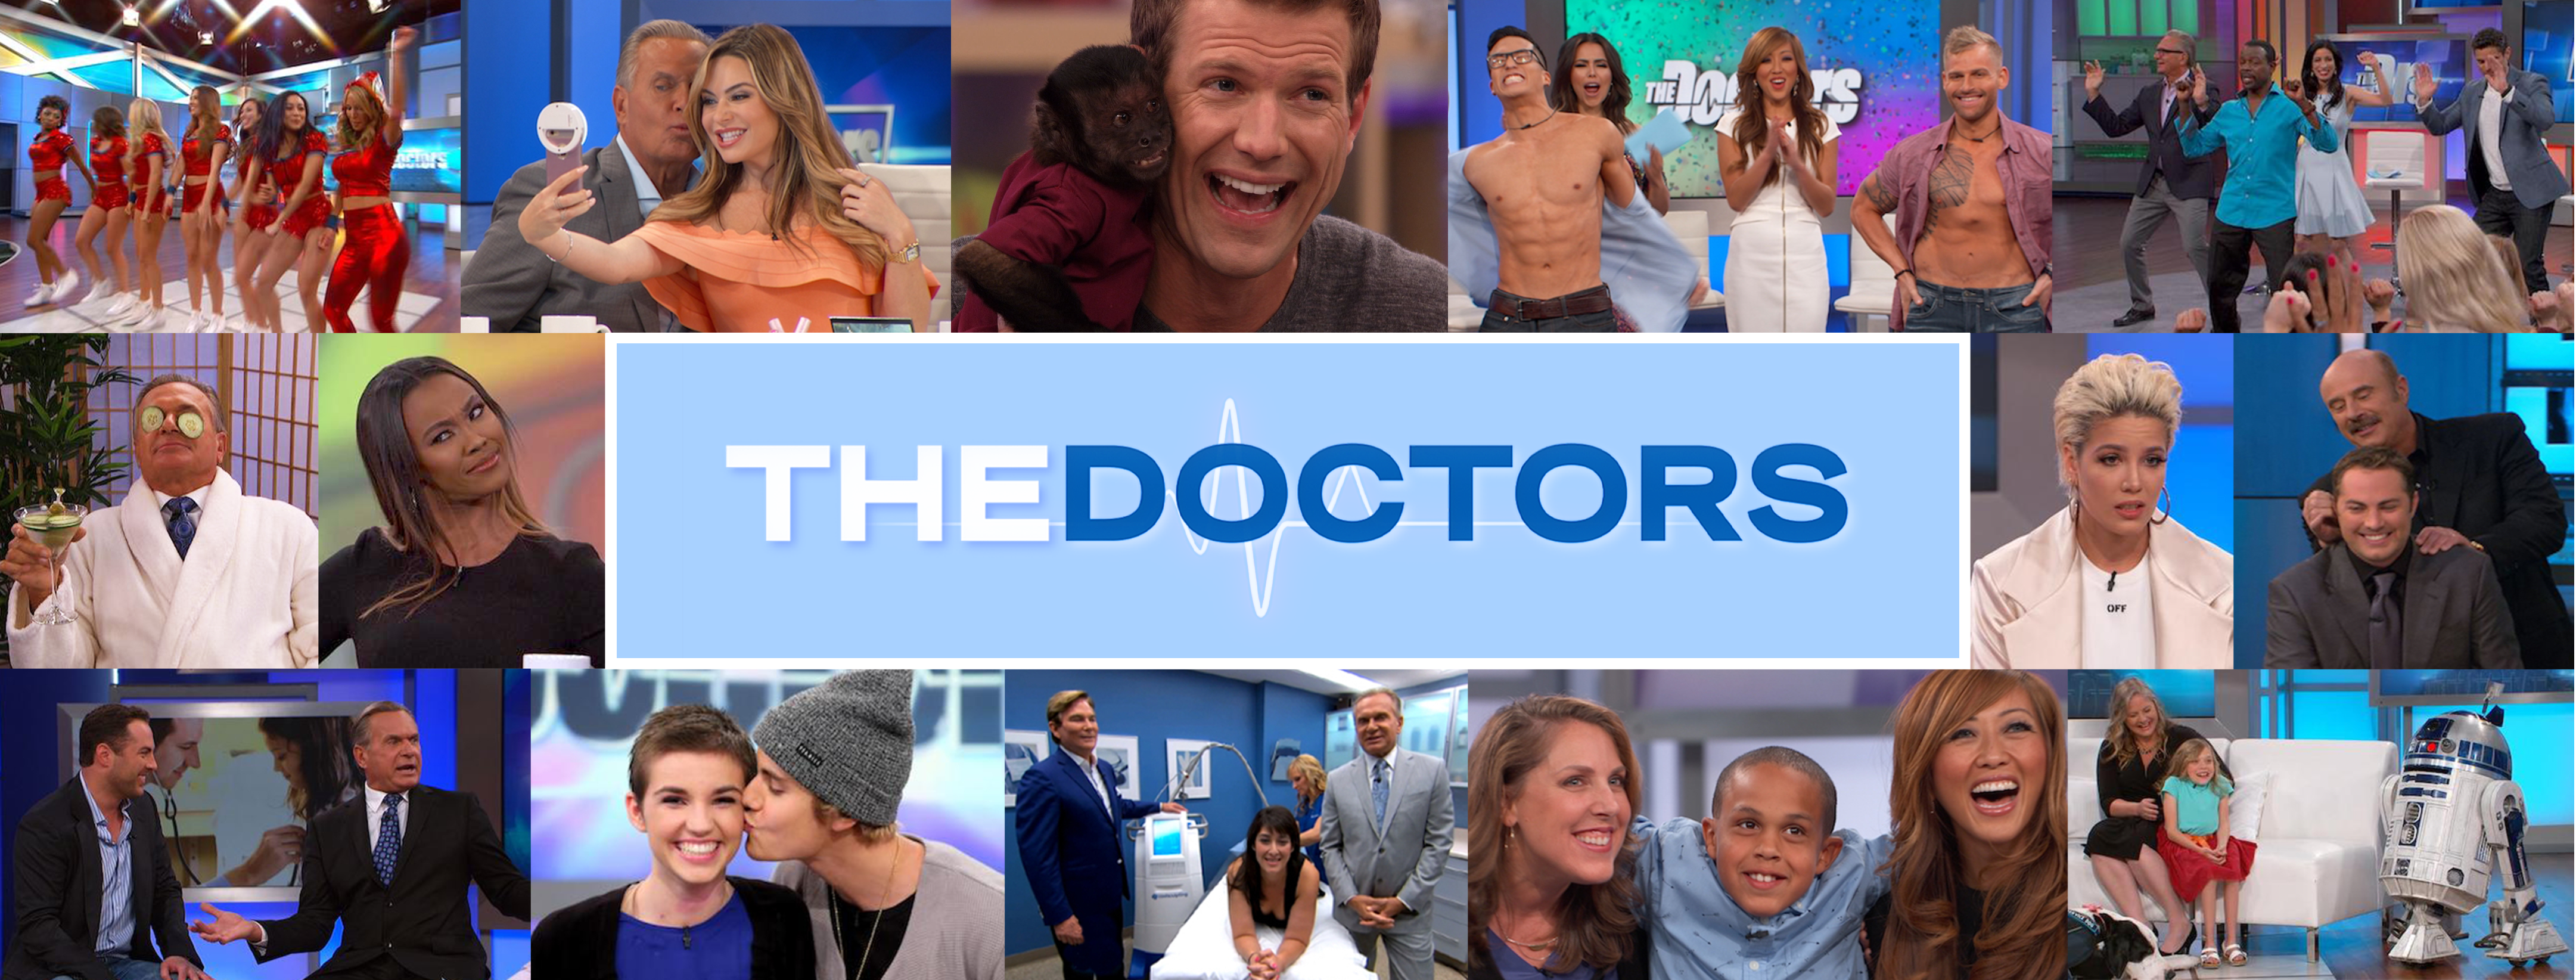 The Doctors seasons three and four